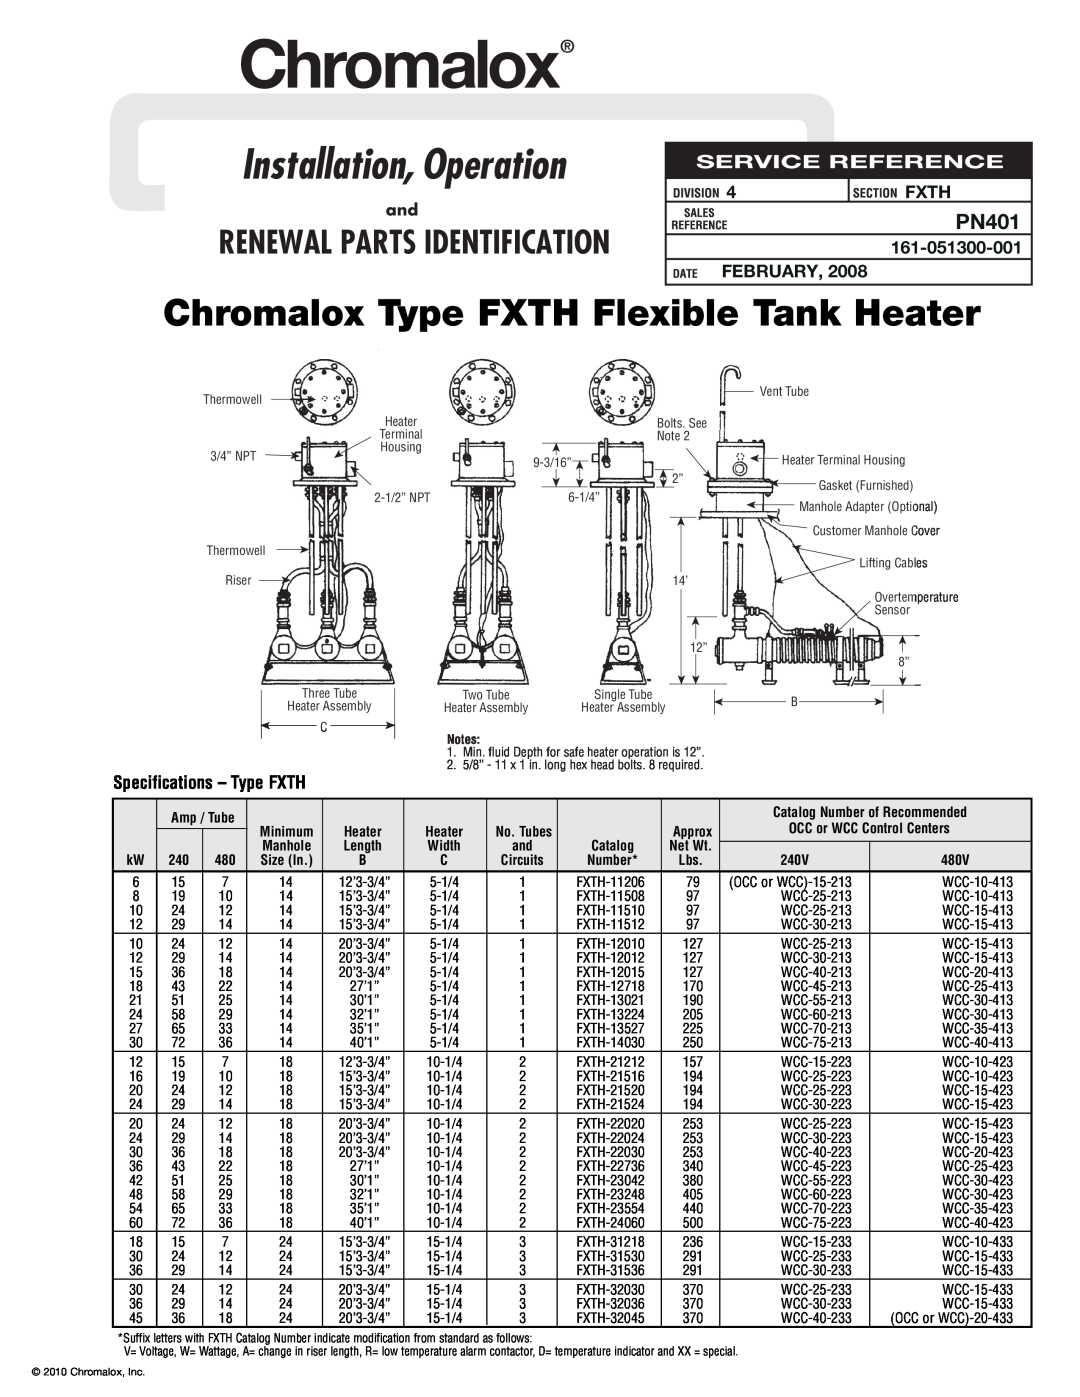 Chromalox PN401 specifications Specifications - Type FXTH, Chromalox, Installation, Operation, Fxth, February, Length 